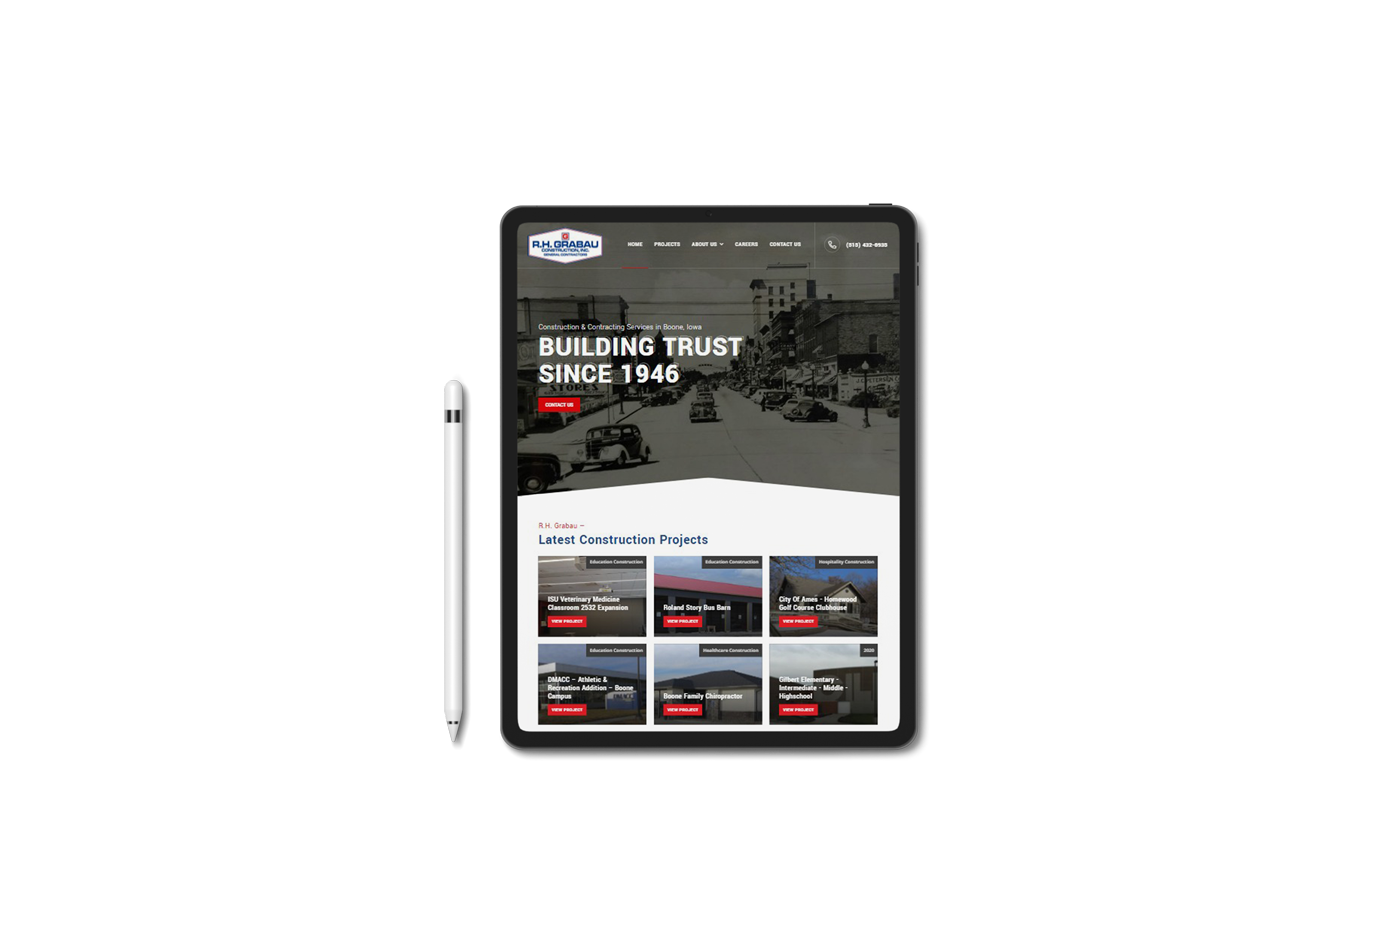 Mockup showing the tablet view of the RH Grabau website